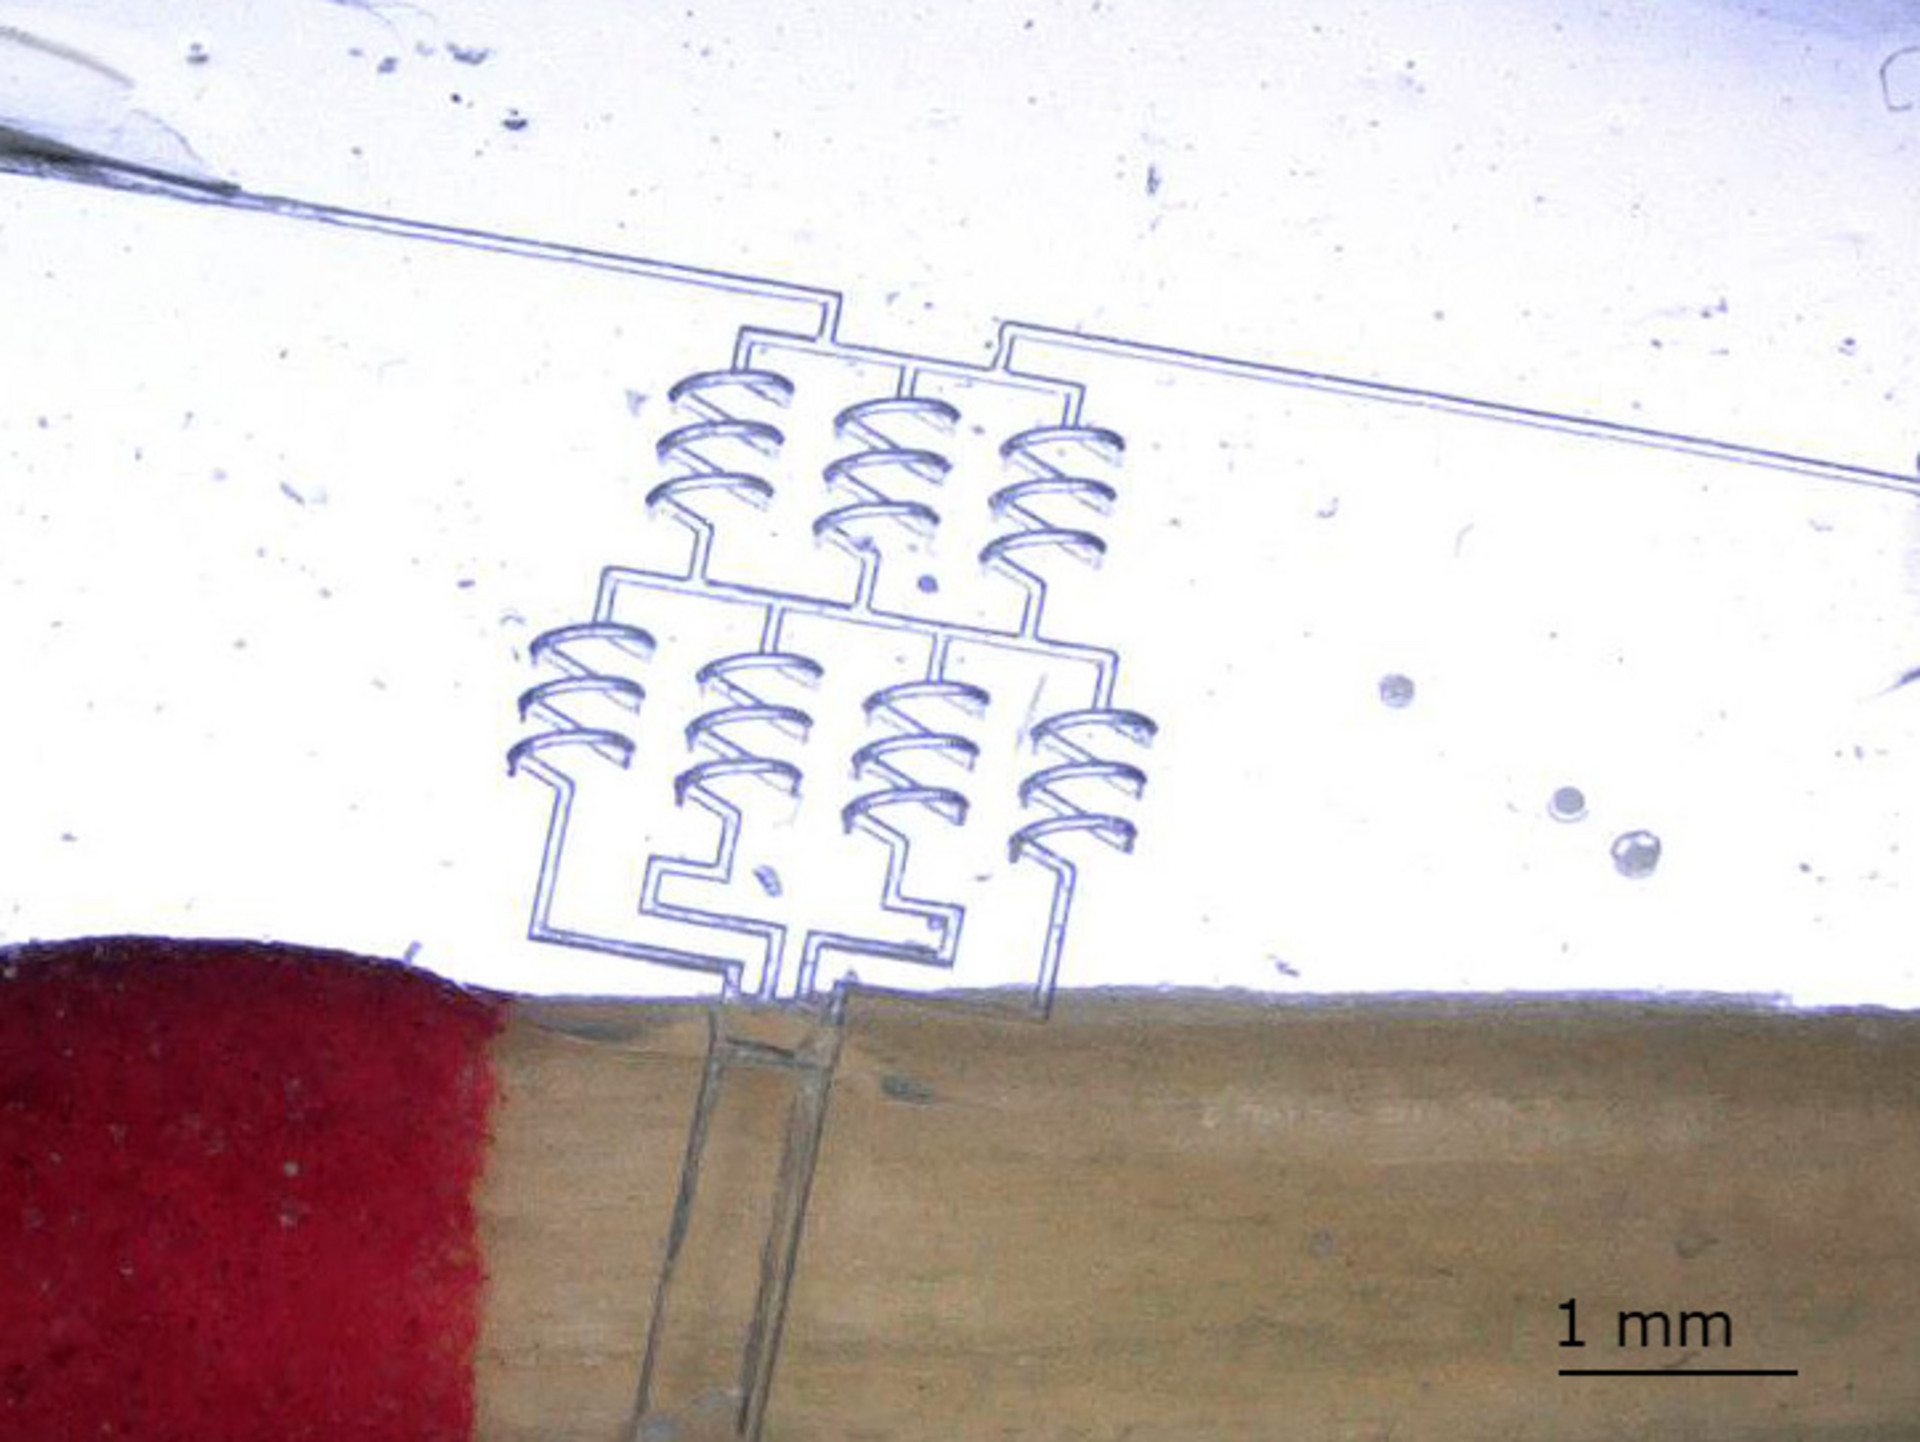 3D microfluidic mixer in fused silica glass fabricated based on Nanoscribe's microfabrication technology